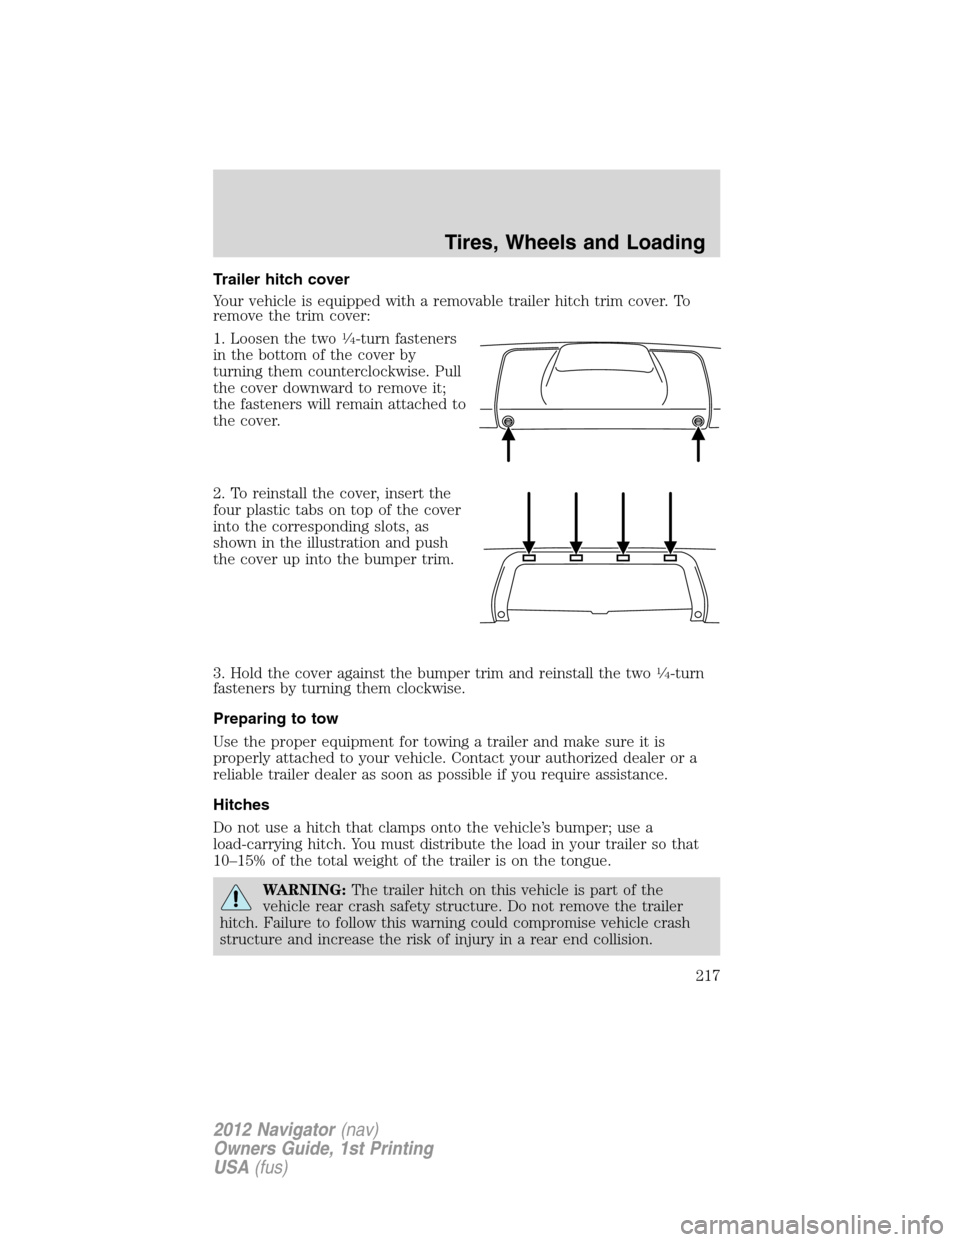 LINCOLN NAVIGATOR 2012  Owners Manual Trailer hitch cover
Your vehicle is equipped with a removable trailer hitch trim cover. To
remove the trim cover:
1. Loosen the two
1�4-turn fasteners
in the bottom of the cover by
turning them counte